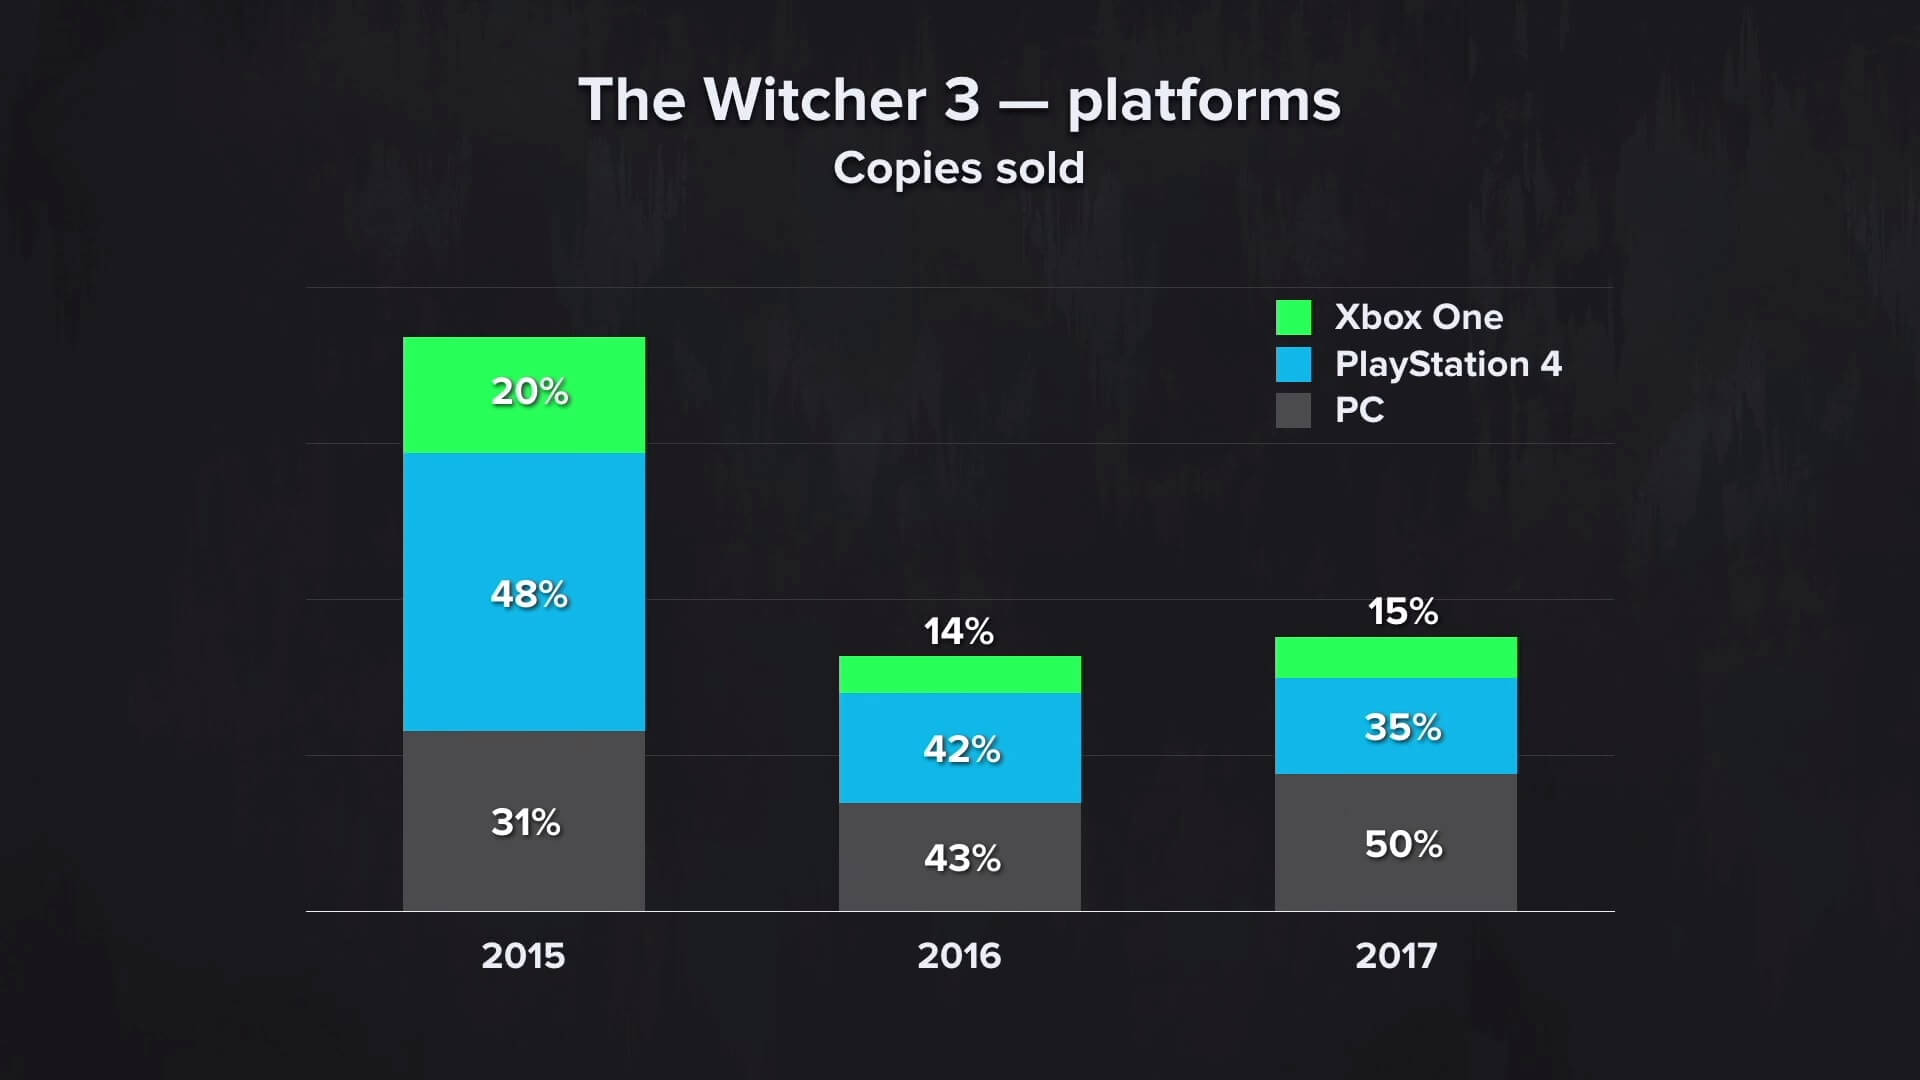 The Witcher 3 Pc Vs Ps4 Vs Xbox One Sale Percentages Revealed For 15 16 And 17